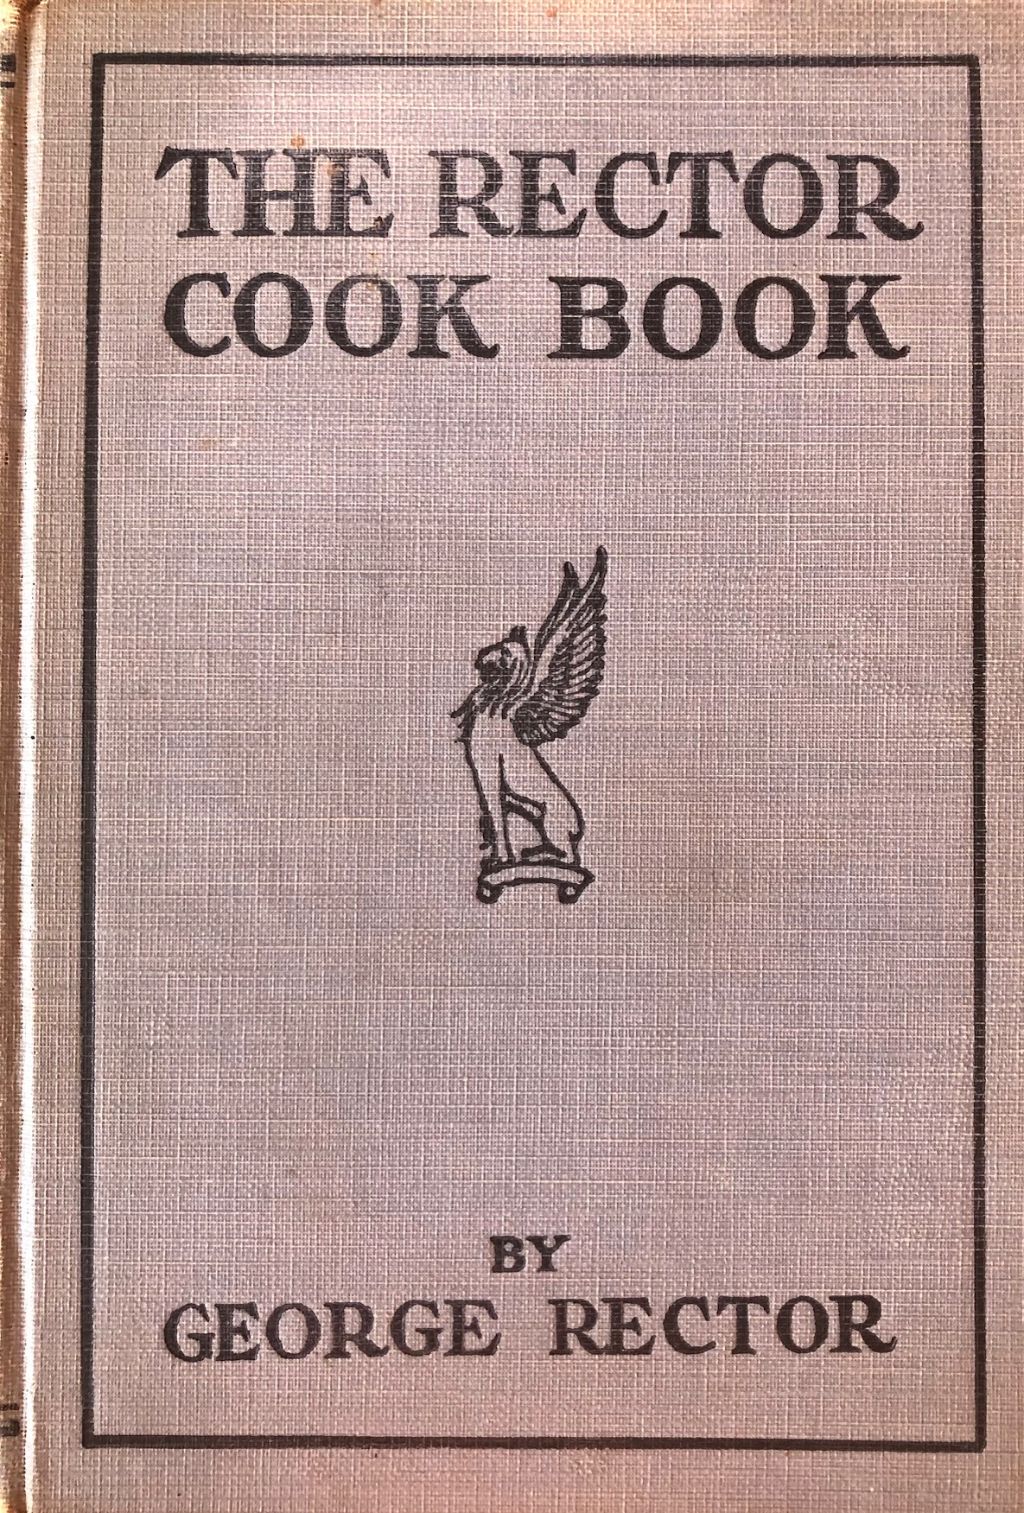 (New York) Rector, George. The Rector Cook Book: World Famous Recipes. SIGNED.